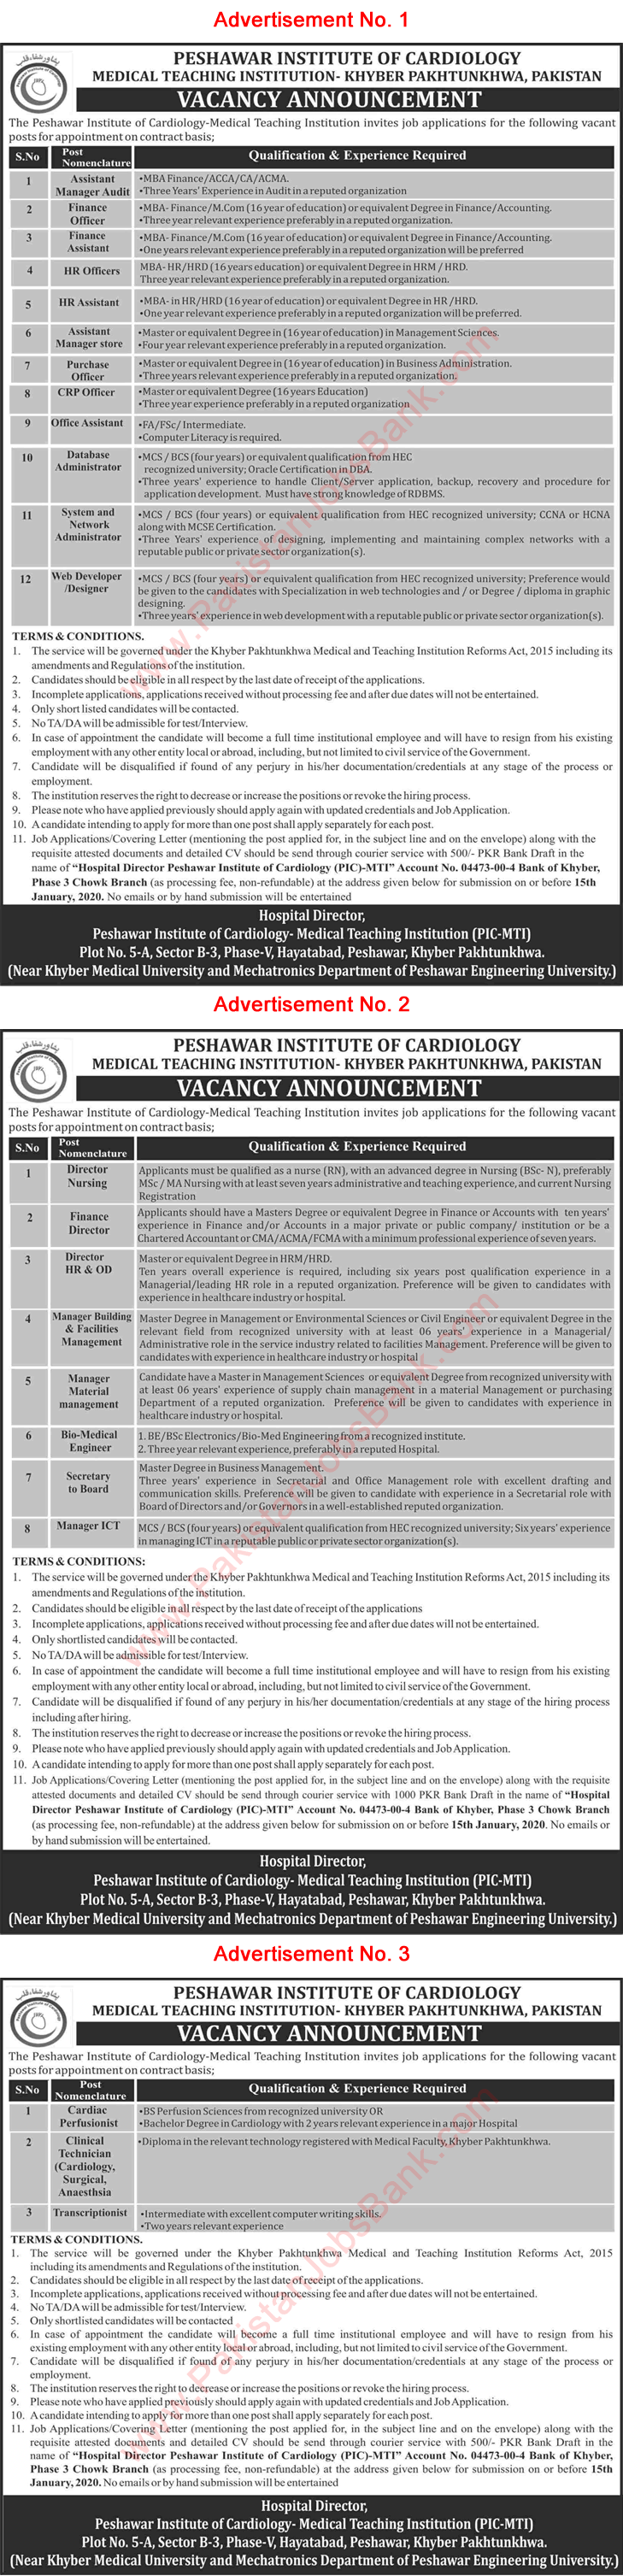 Peshawar Institute of Cardiology Jobs 2019 December 2020 PIC MTI Clinical Technicians & Others Latest